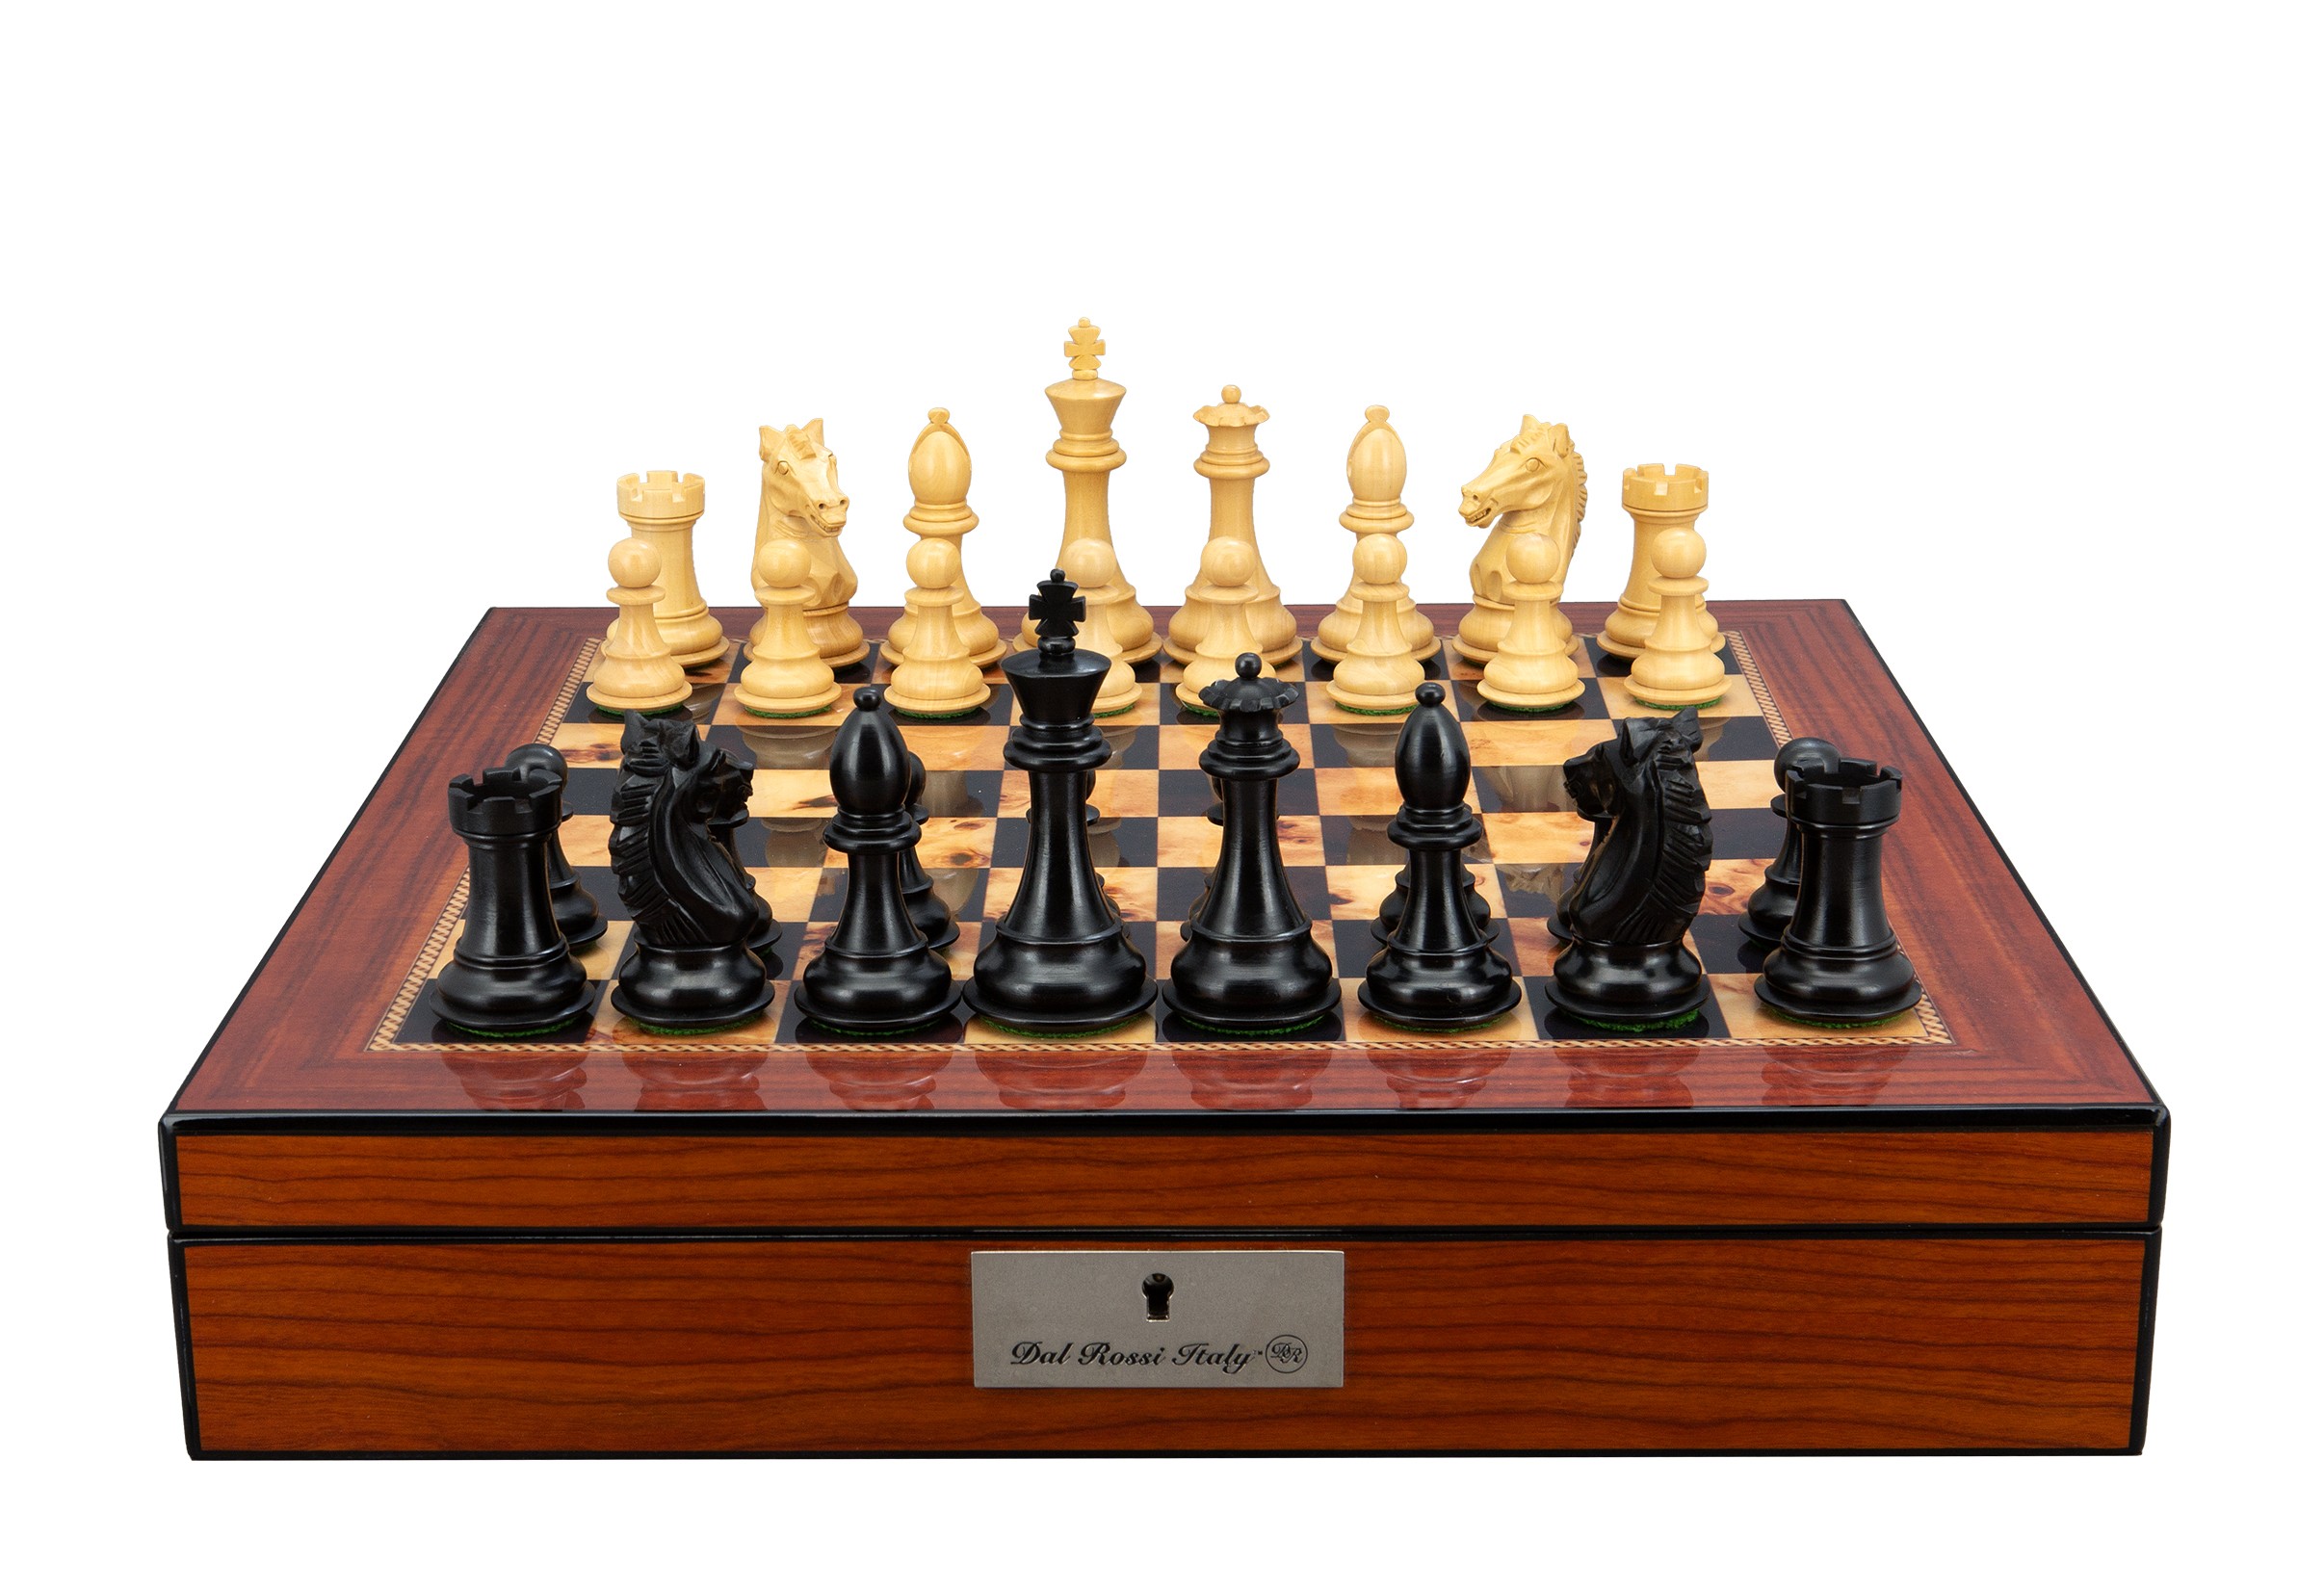 Dal Rossi Italy, Ebony Finish / Boxwood 95mm Wood Double Weighted on a Walnut Finish Shiny Chess Box with Compartments 16"